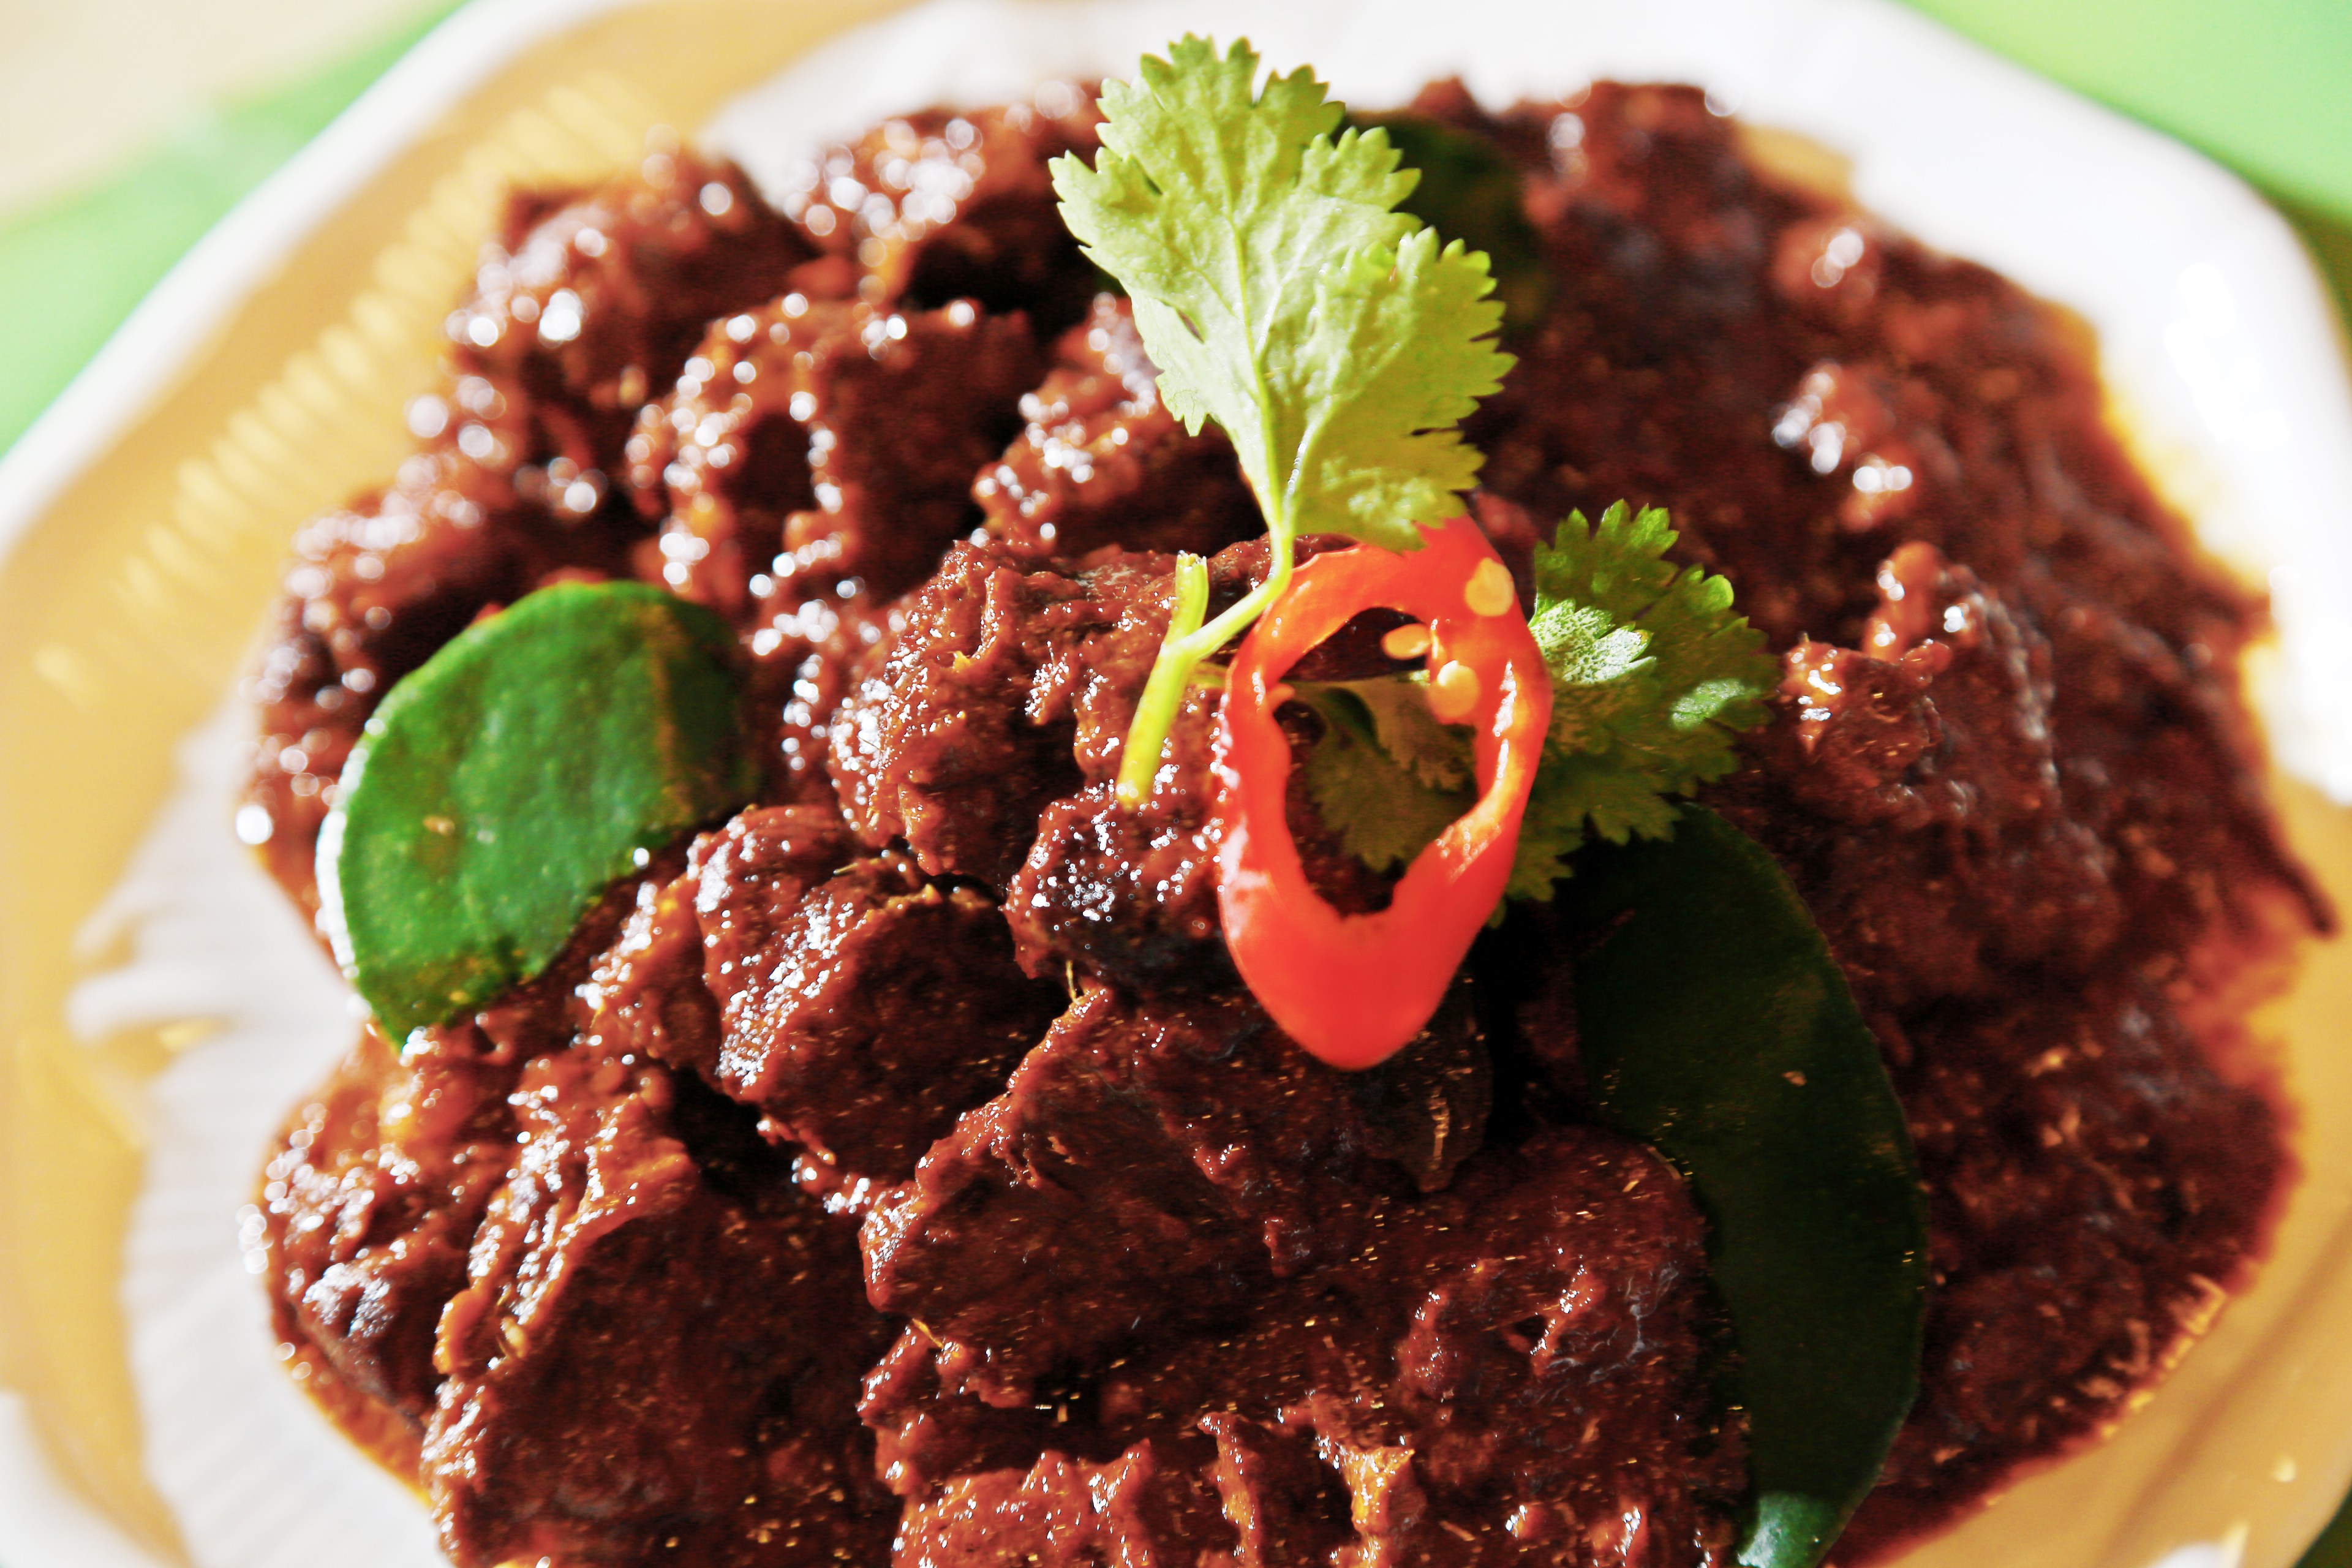 A dish with rich, dark rendang curry, decorated with fresh green lime leaves and a bright red chili slice, served on a yellow plate.